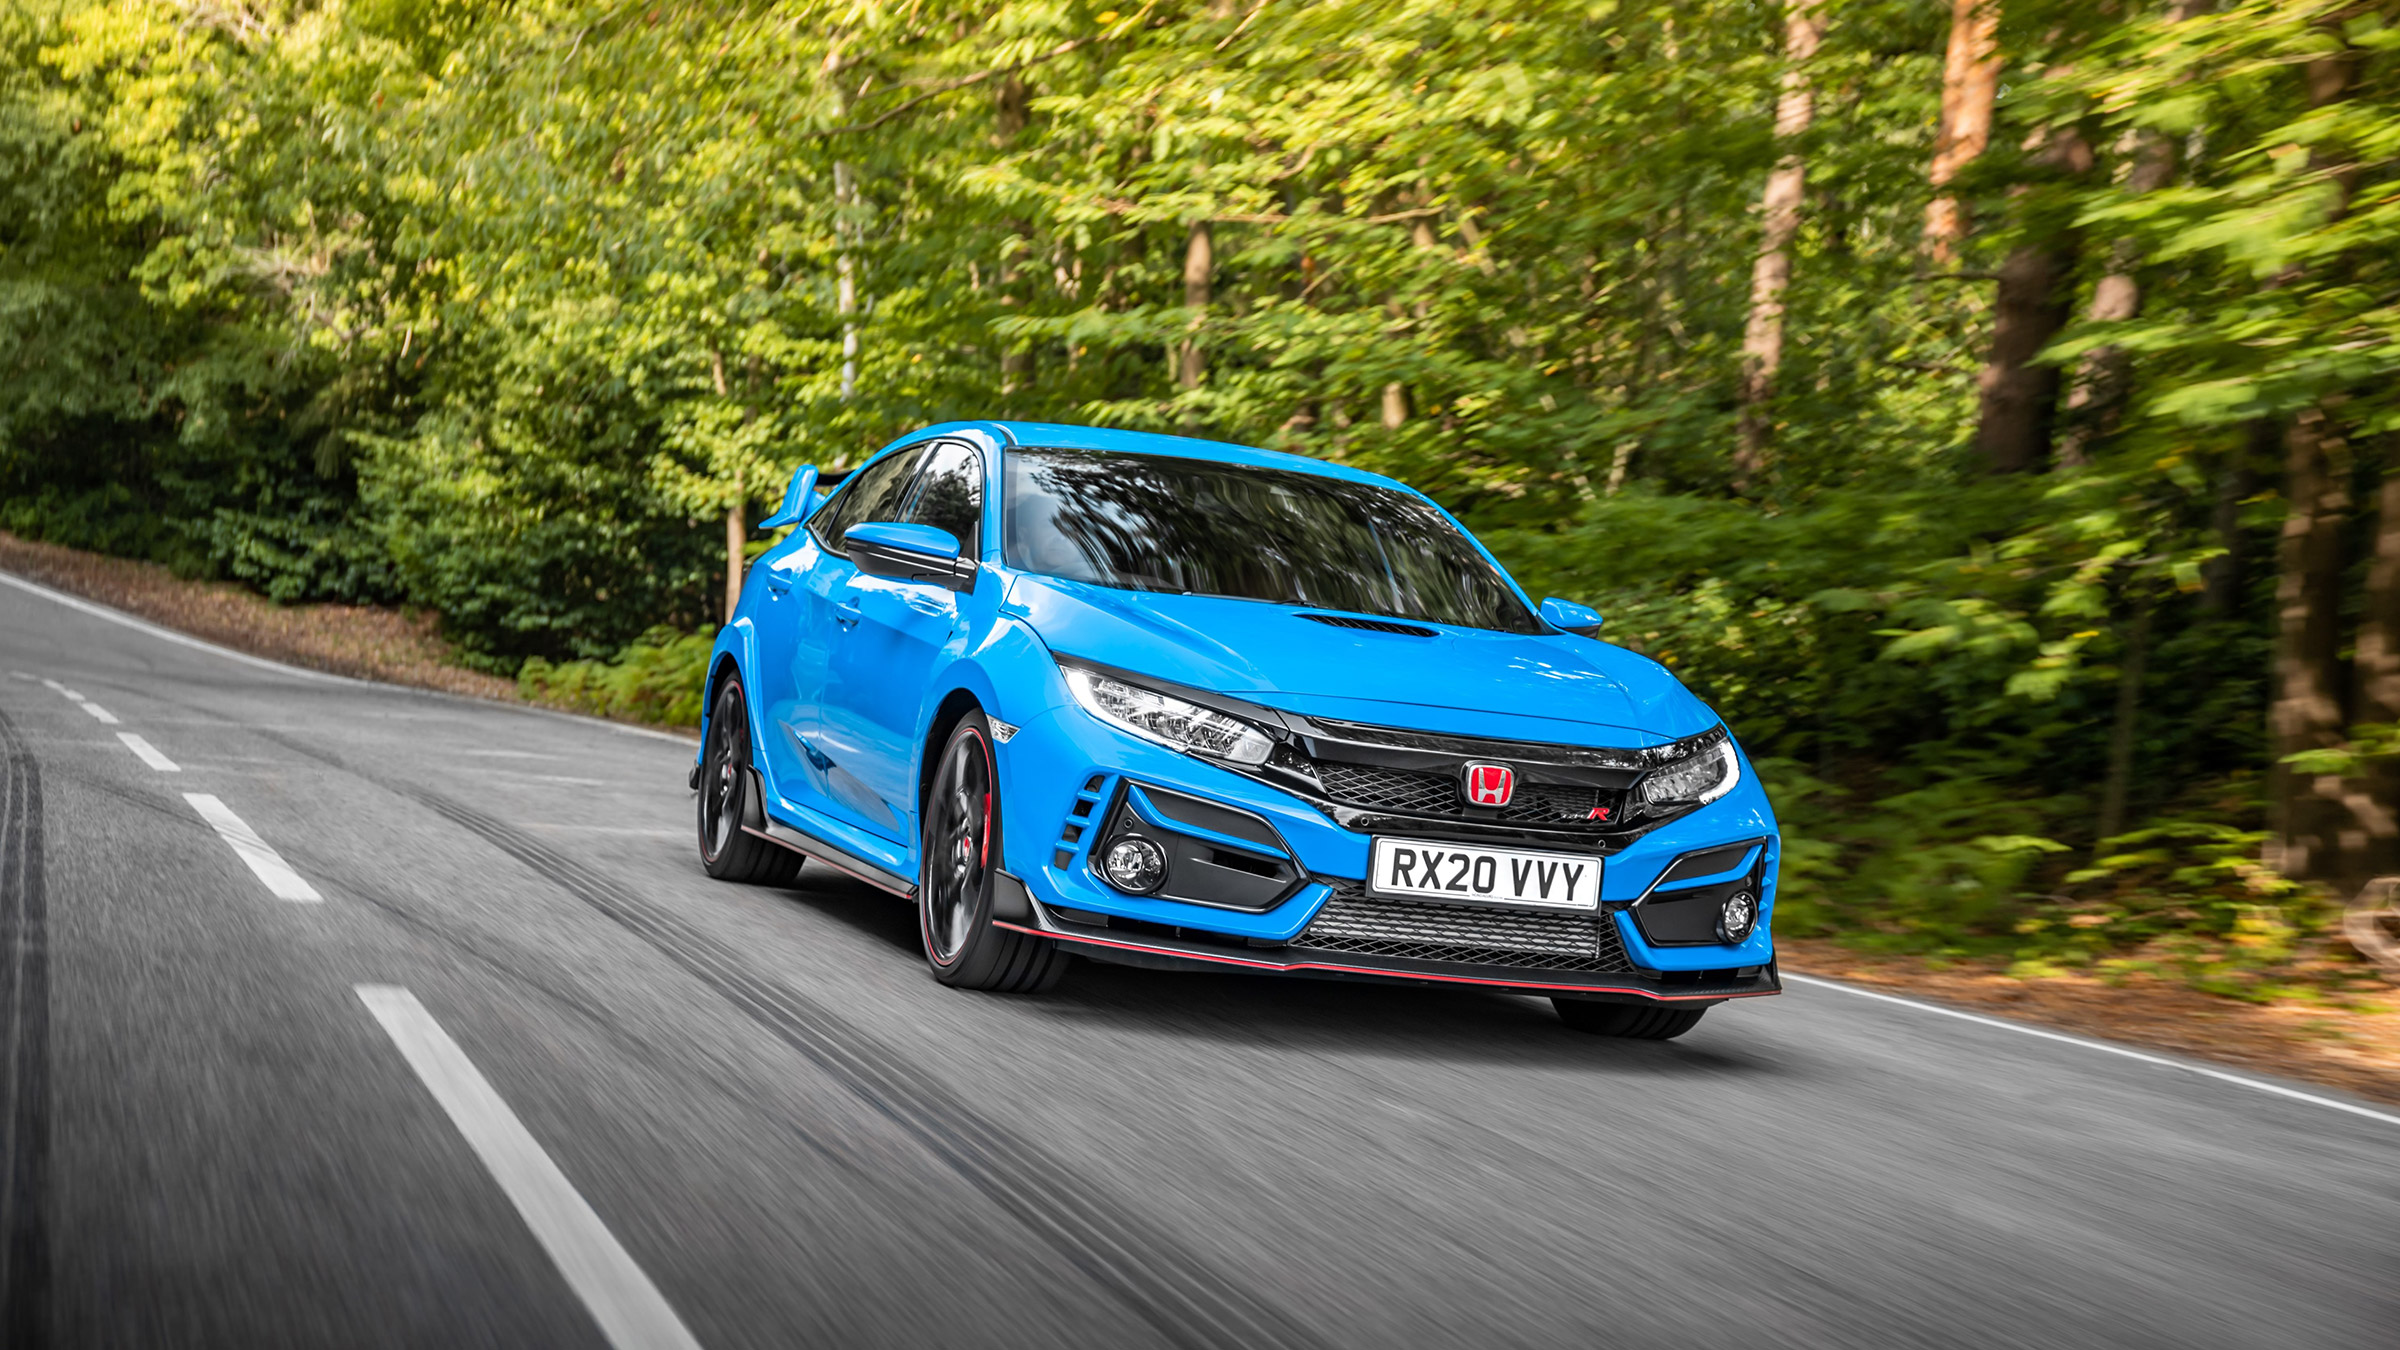 Honda Civic Type R Review Ignore The Looks This Is An Astounding Hot Hatch Evo